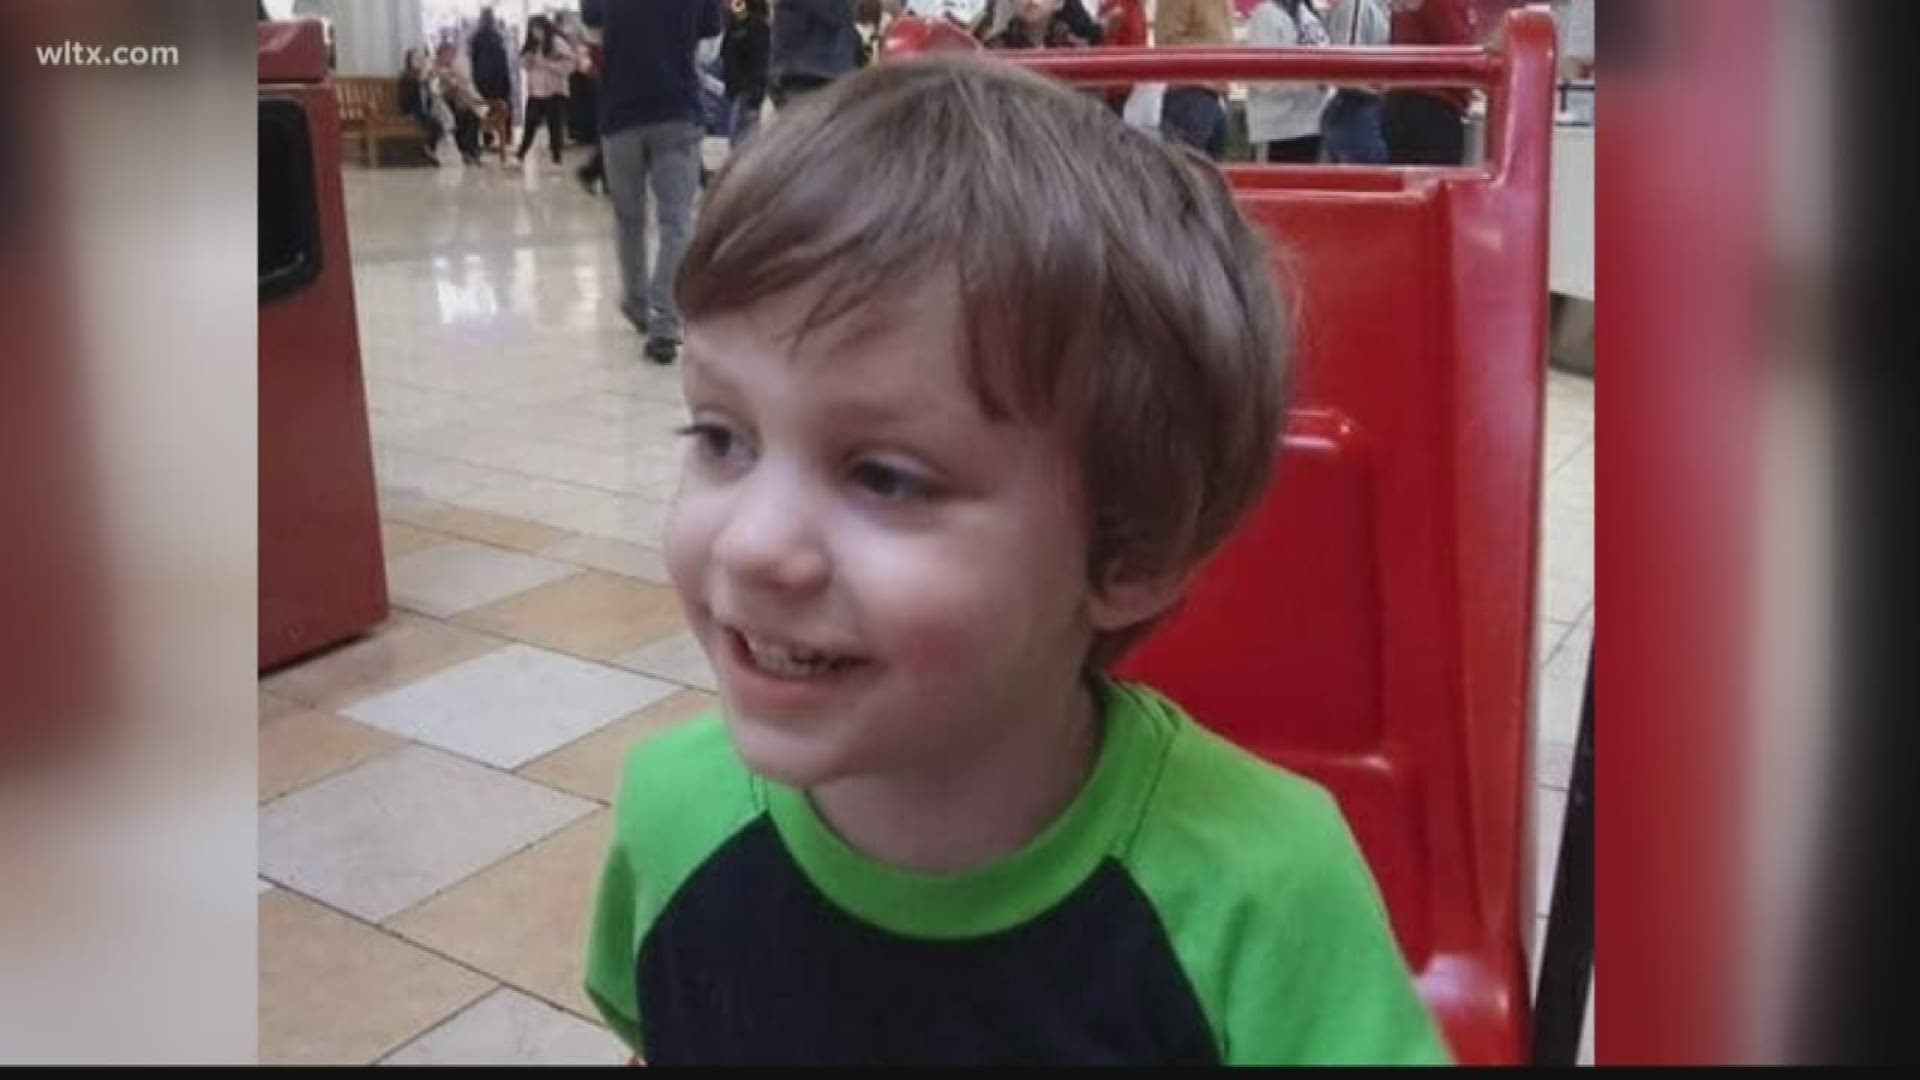 The aunt of 3-year-old Alex Sheptock posted an update on her Facebook Friday morning saying the boy had passed away.